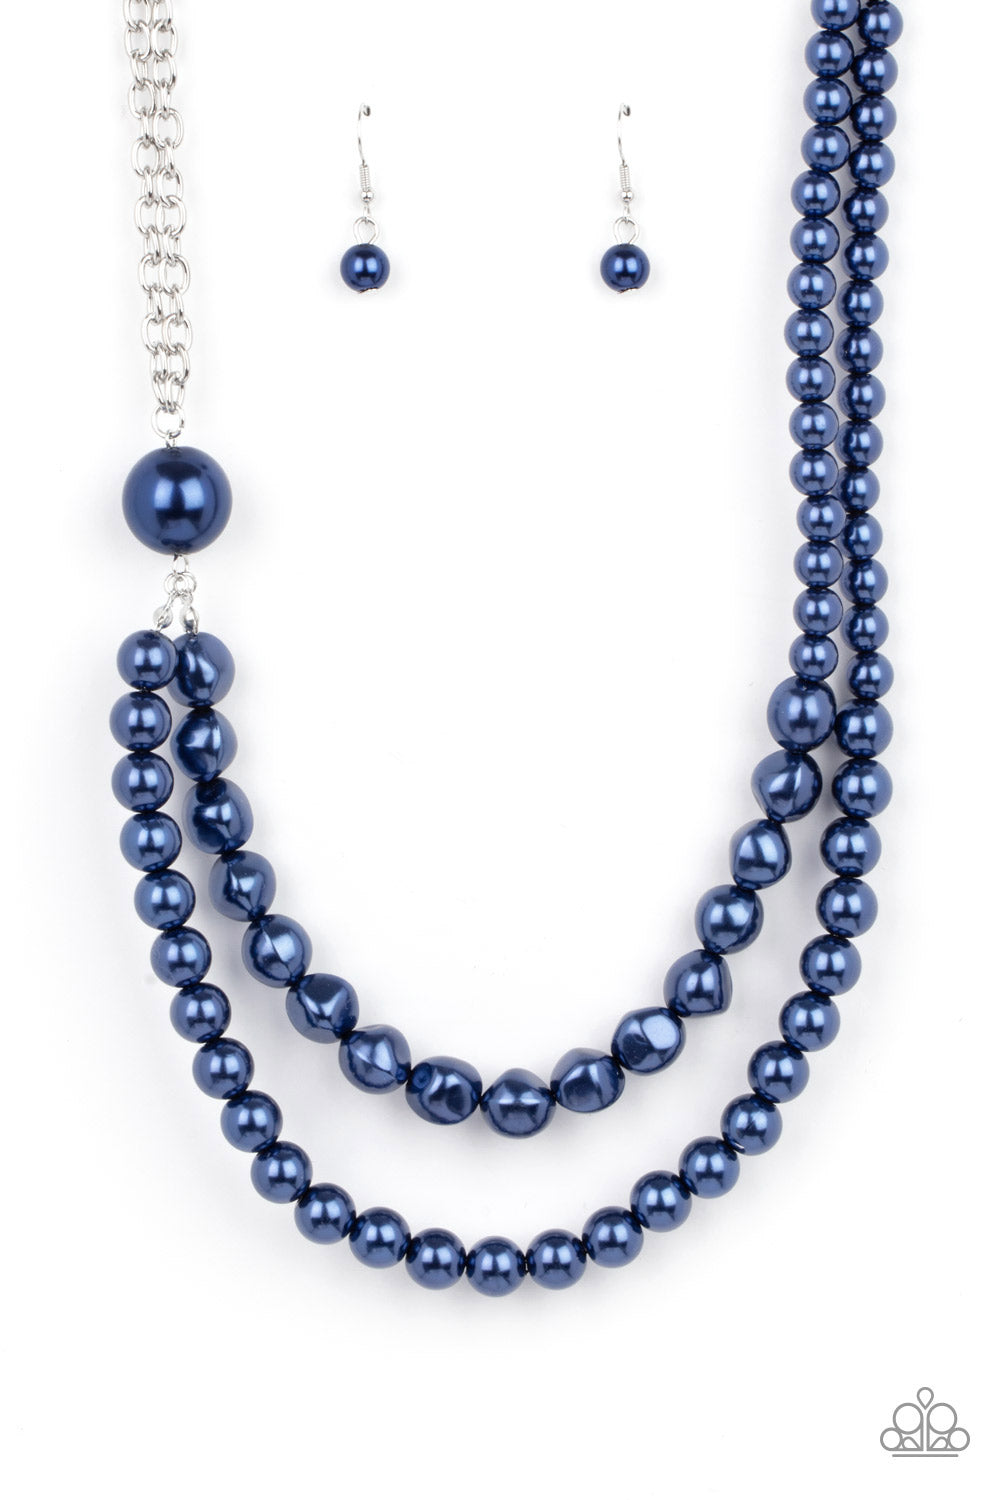 Remarkable Radiance - Blue Pearl Necklace - Paparazzi Accessories